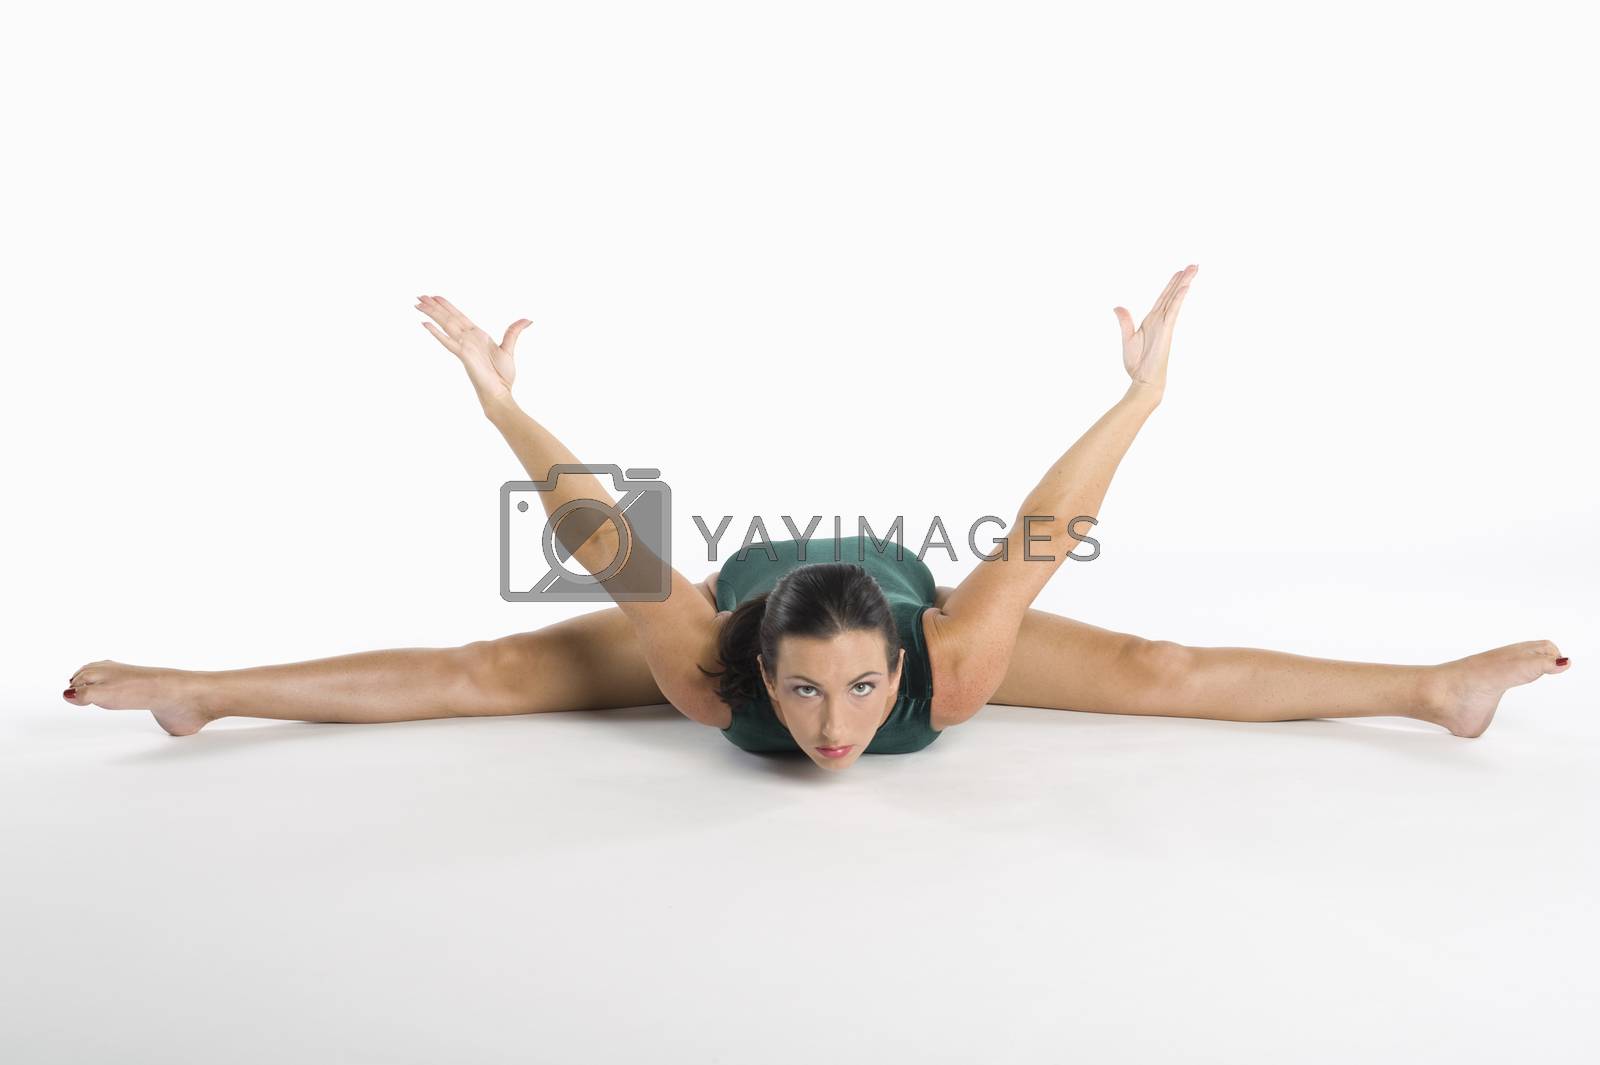 Royalty free image of Portrait of mid adult woman exercising over white background by moodboard